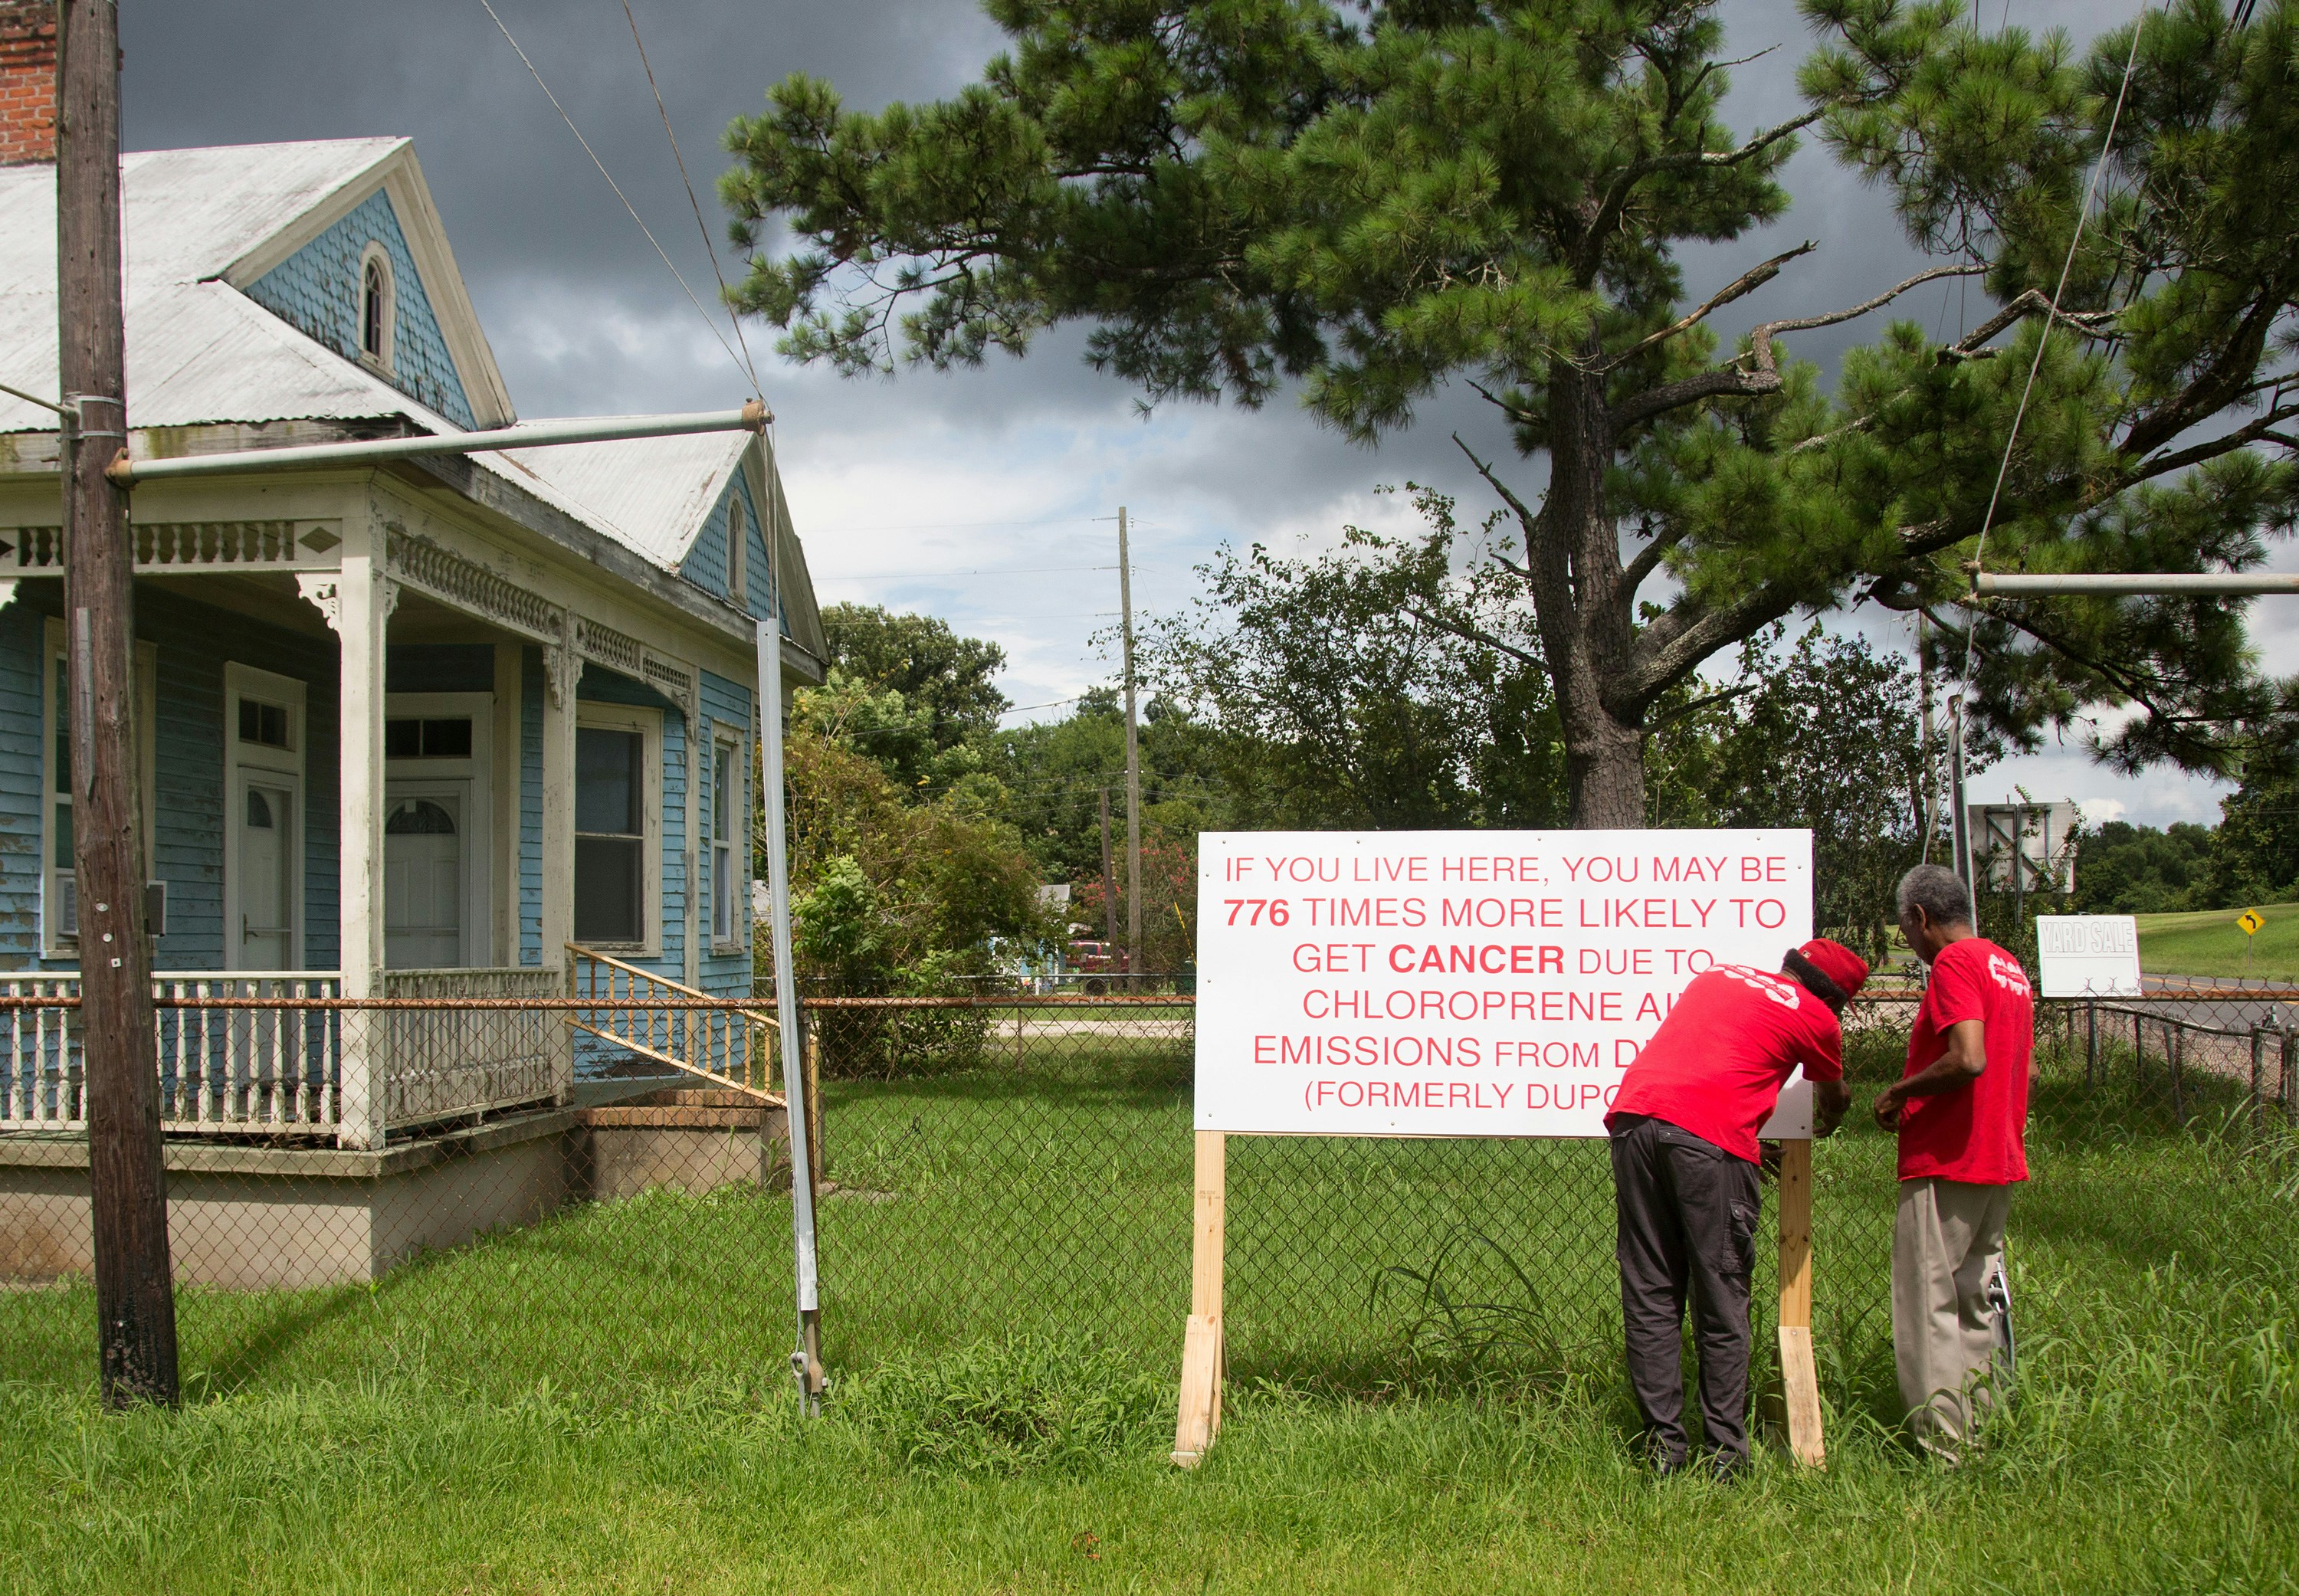 Concerned Citizens of St Jophn the Baptist puting up signs in Reserve, Louisiana. July 16, 2017